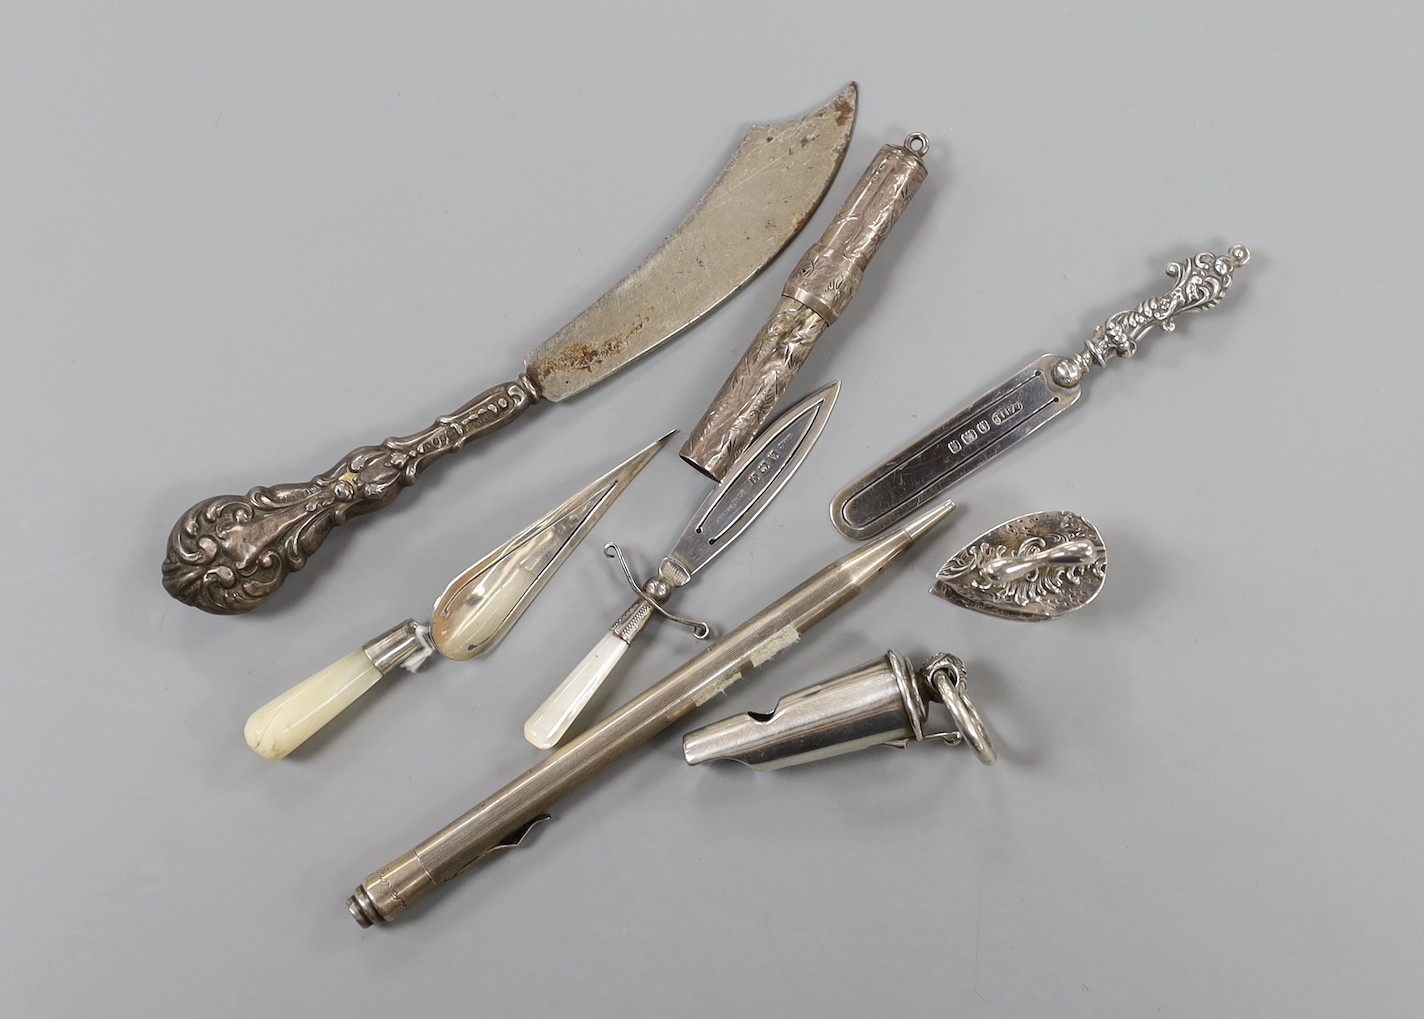 Collectable small silver including a Victorian silver whistle, London, 1859 (lacking outer case), three silver bookmarks, including trowel and dagger, a sterling pen, pencil case(no lead), silver handled scimitar paper k